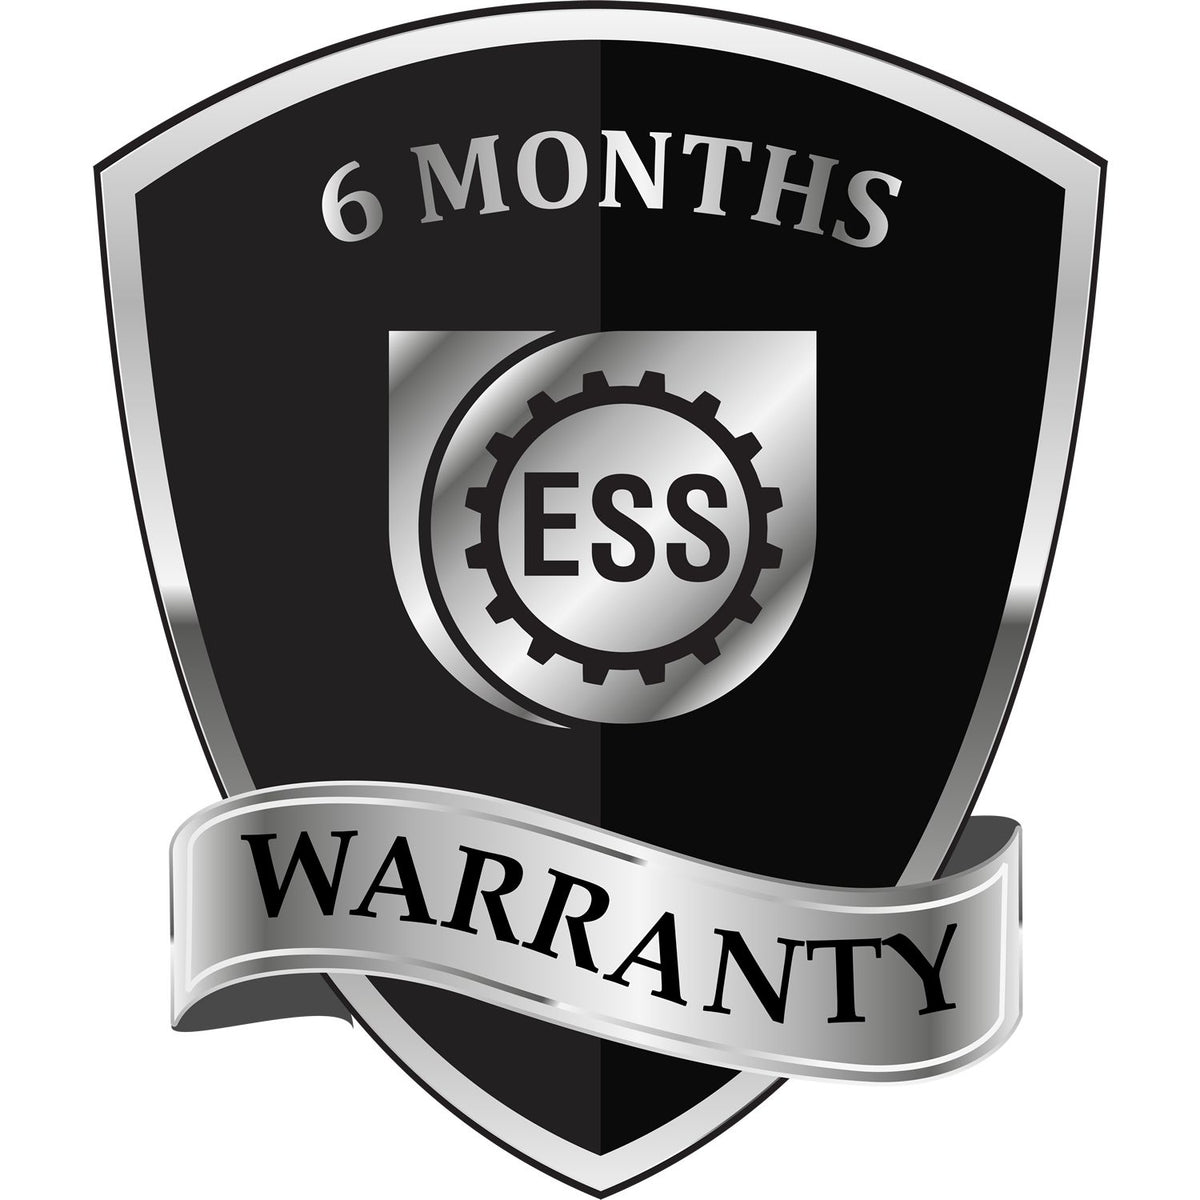 A badge or emblem showing a warranty icon for the New Jersey Professional Engineer Seal Stamp